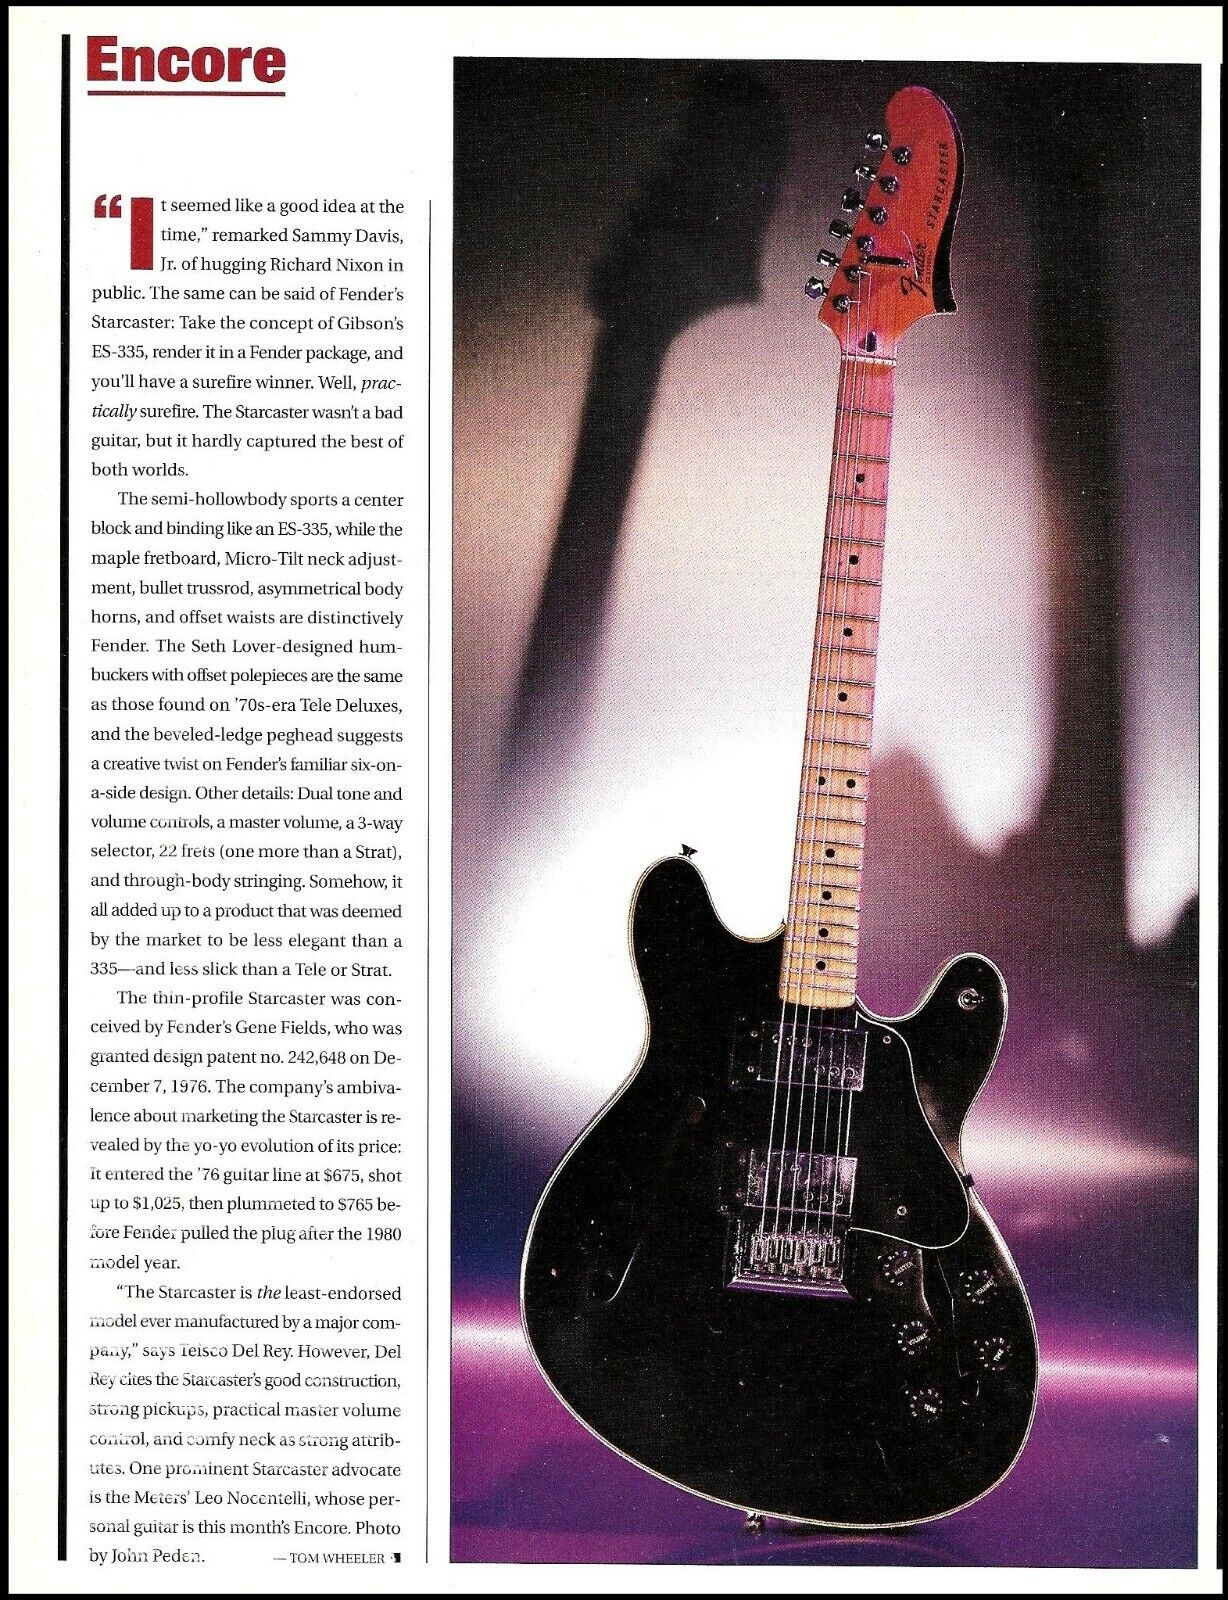 The Fender 1976 Starcaster guitar history 2000 pin-up article print